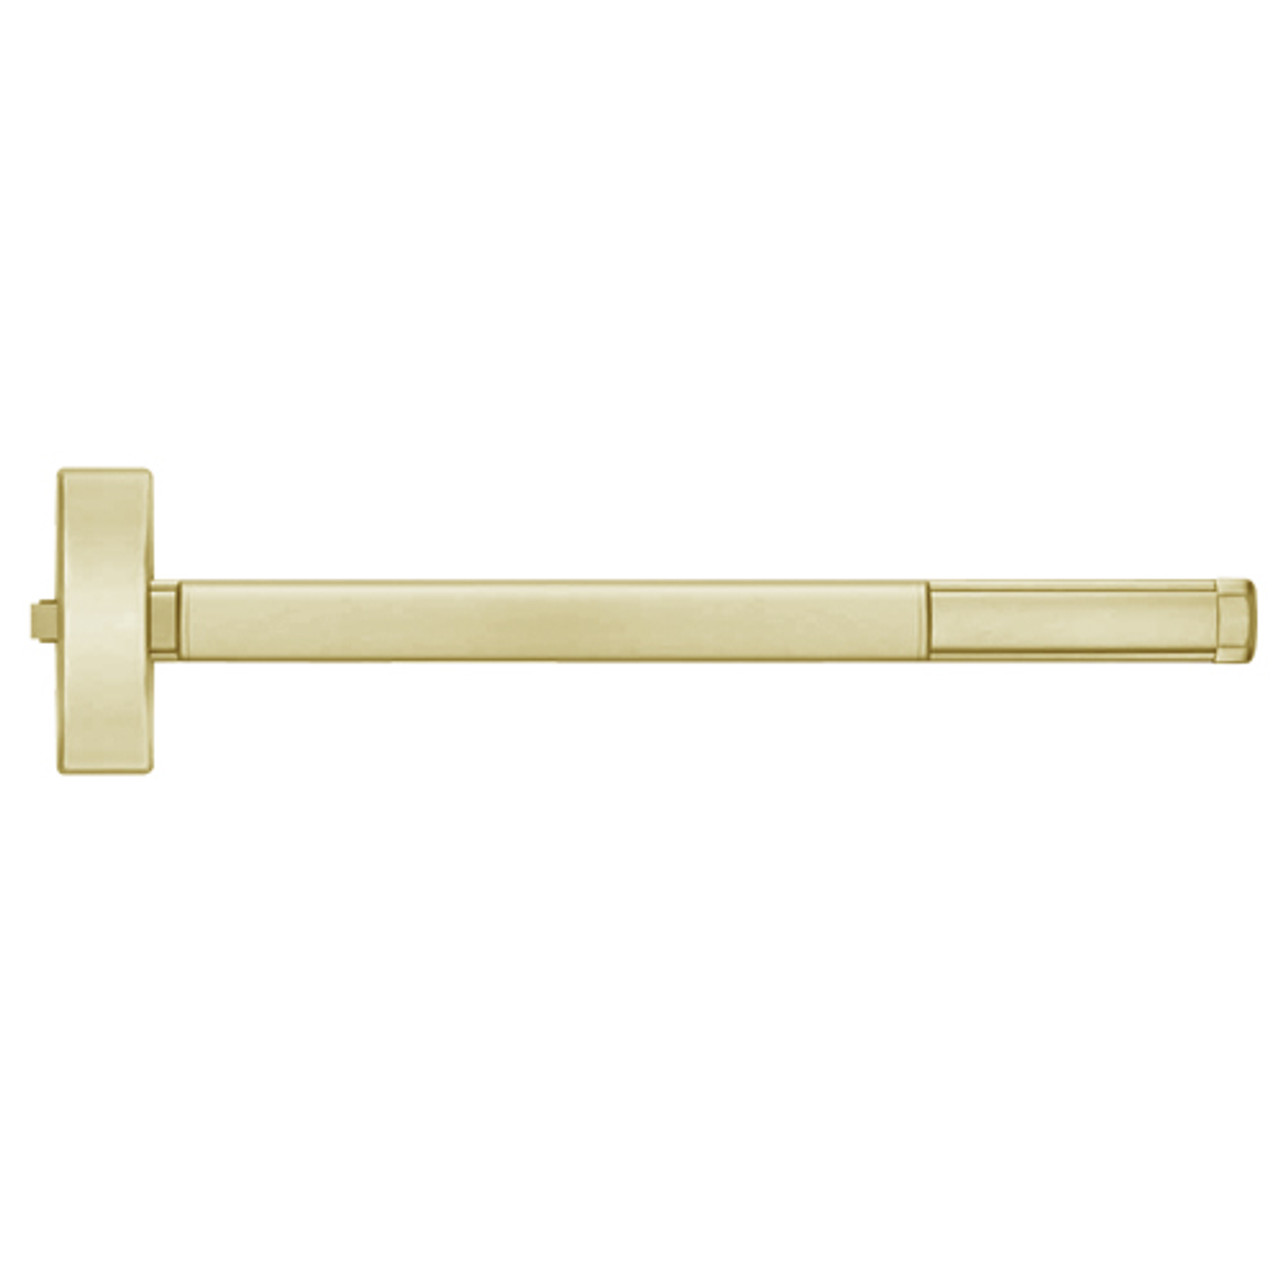 MLR2103-606-48 PHI 2100 Series Non Fire Rated Apex Rim Exit Device with Motorized Latch Retraction Prepped for Key Retracts Latchbolt in Satin Brass Finish